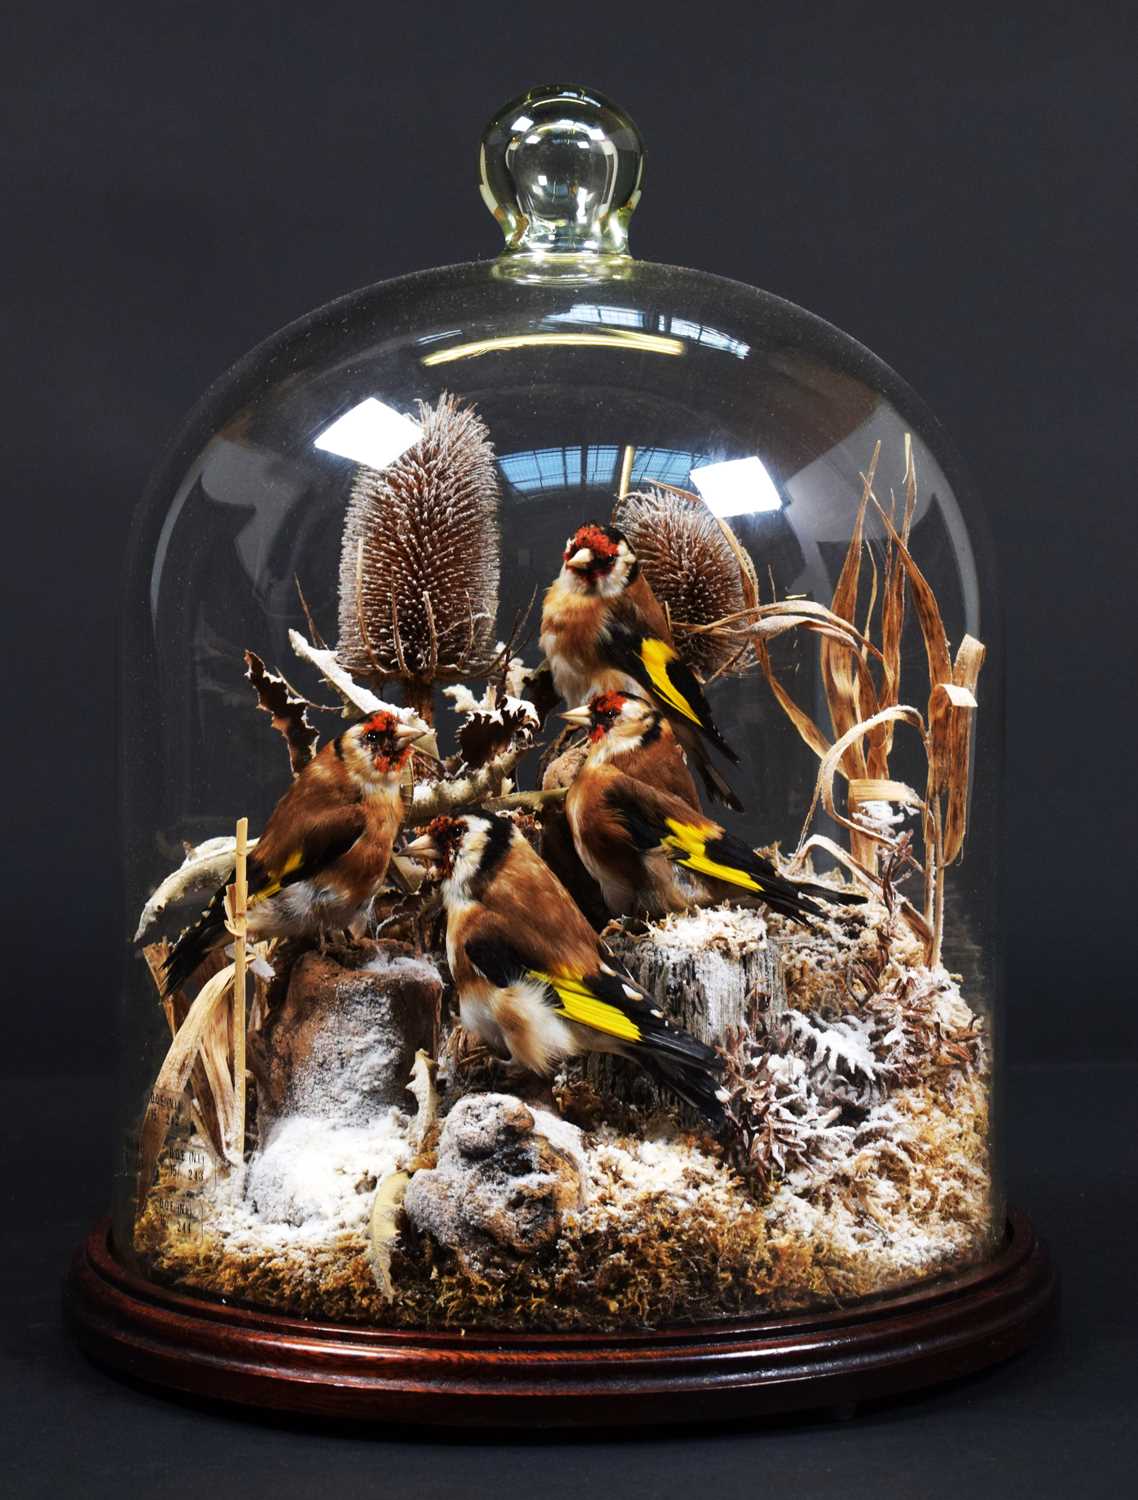 Taxidermy: A Quartet of European Goldfinches Under Dome (Carduelis carduelis), circa 20th century, a